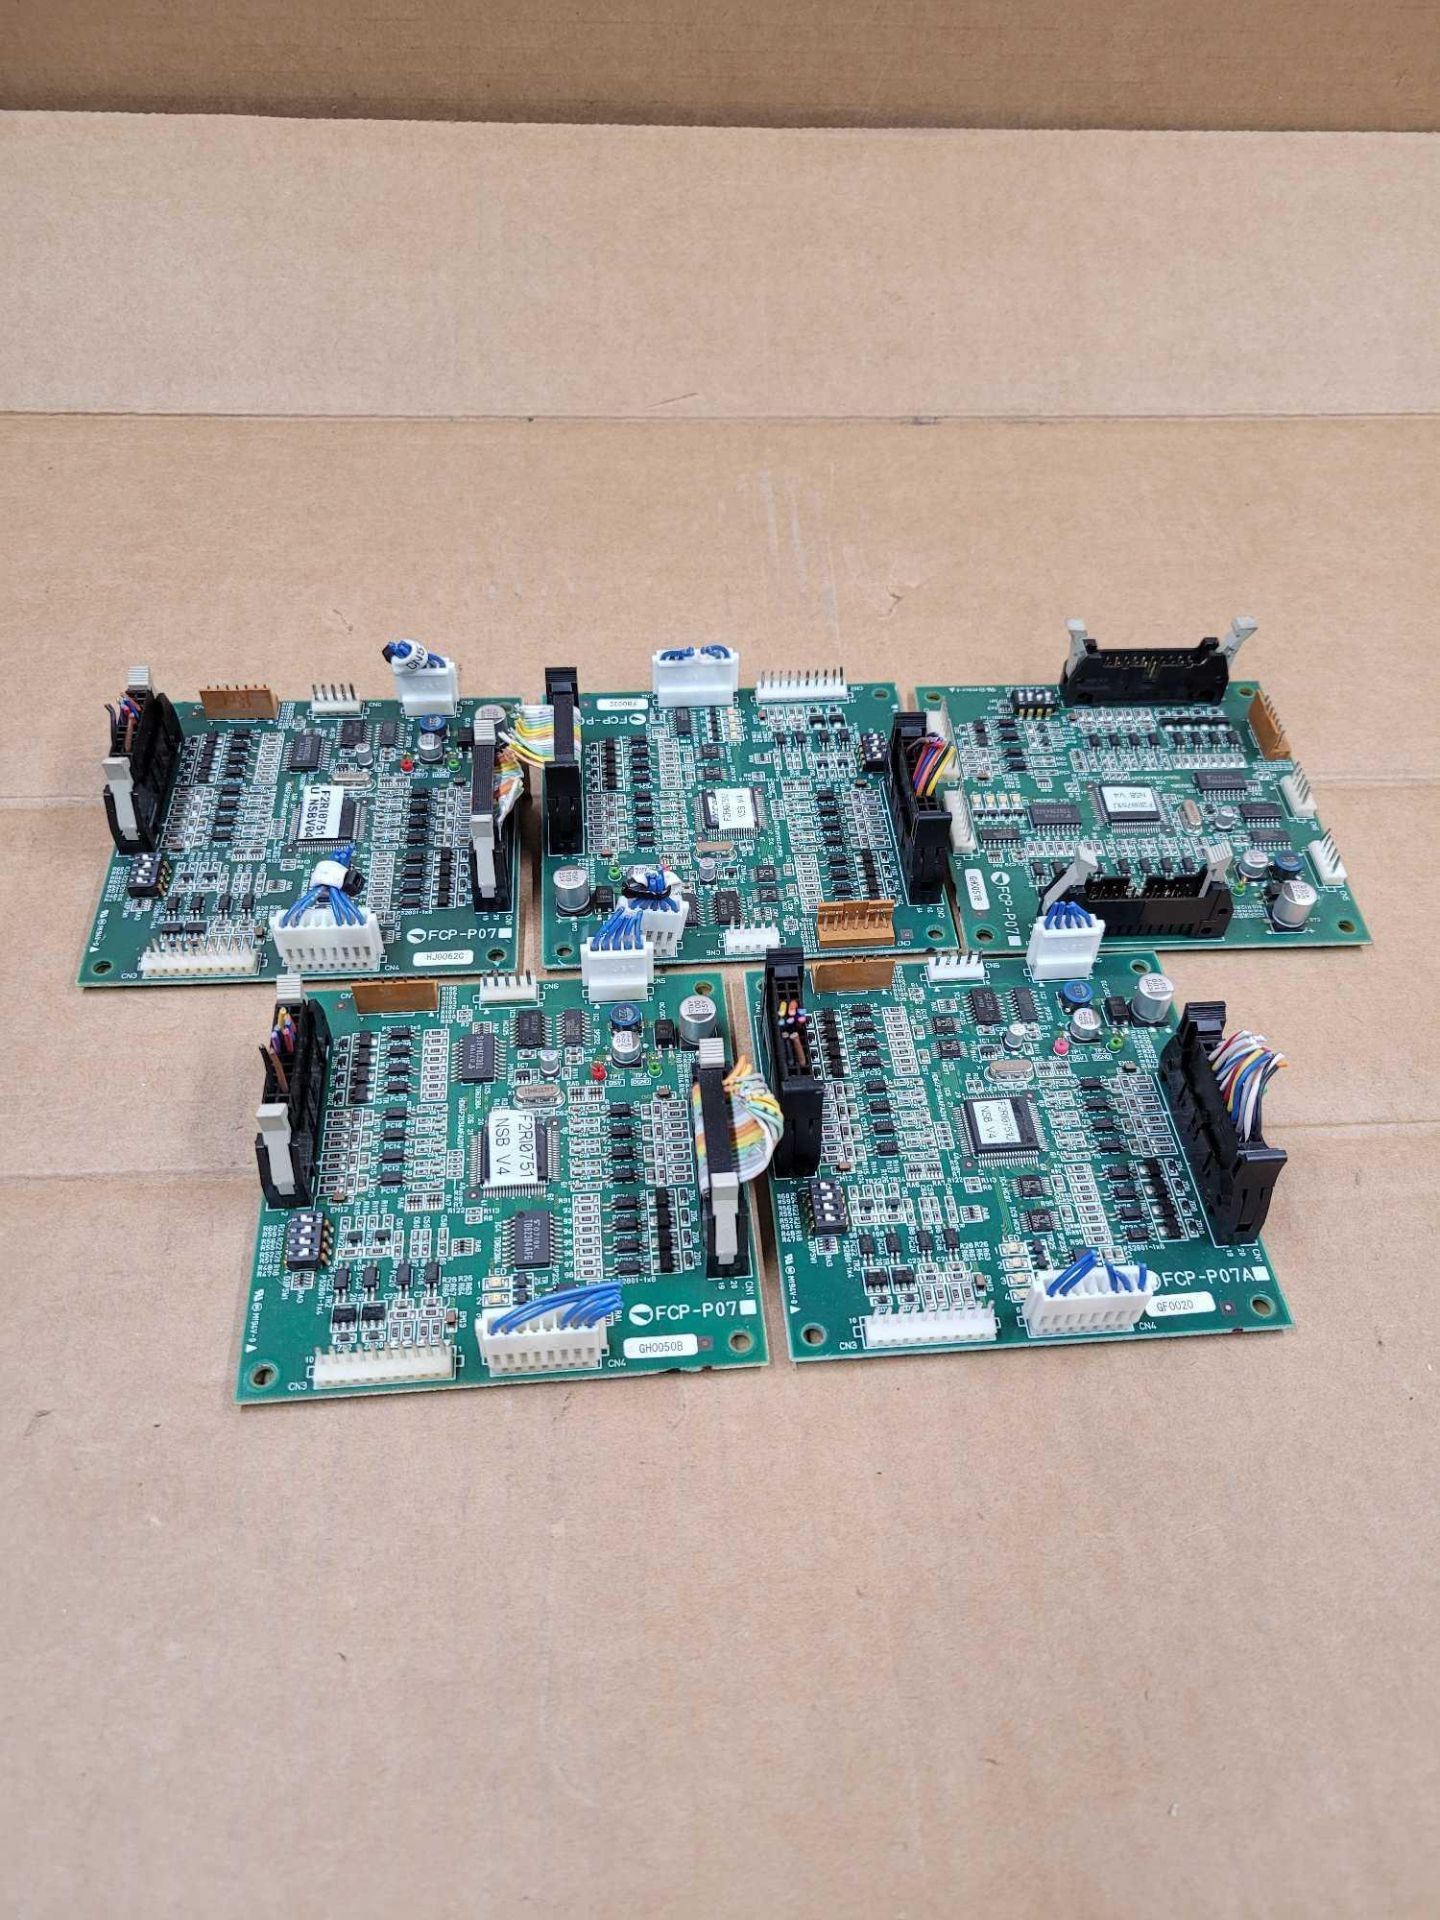 LOT OF 5 ASSORTED COSEL PCB BOARD CARD  /  (2) COSEL FCP-P07A  /  (3) FCP-P07  /  Lot Weight: 0.8 lb